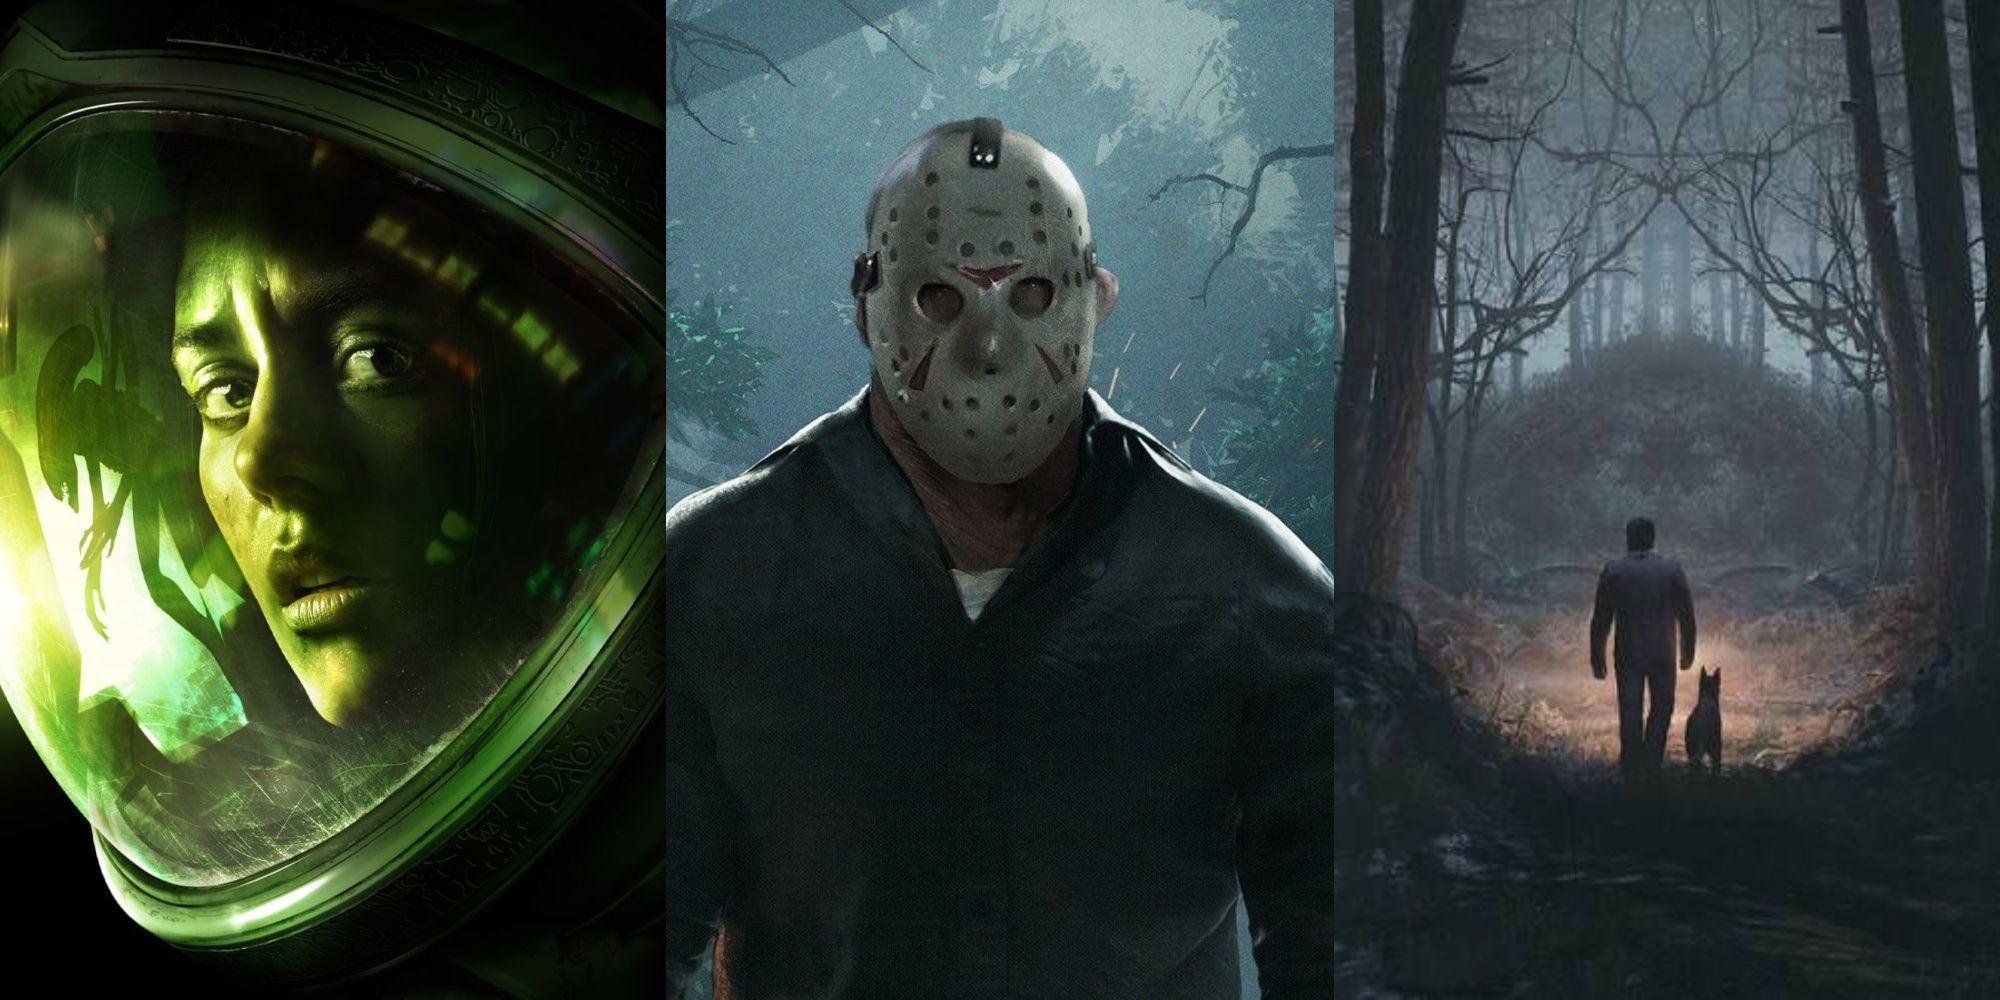 Box art for Alien Isolation and Friday the 13th, and key art for Blair Witch